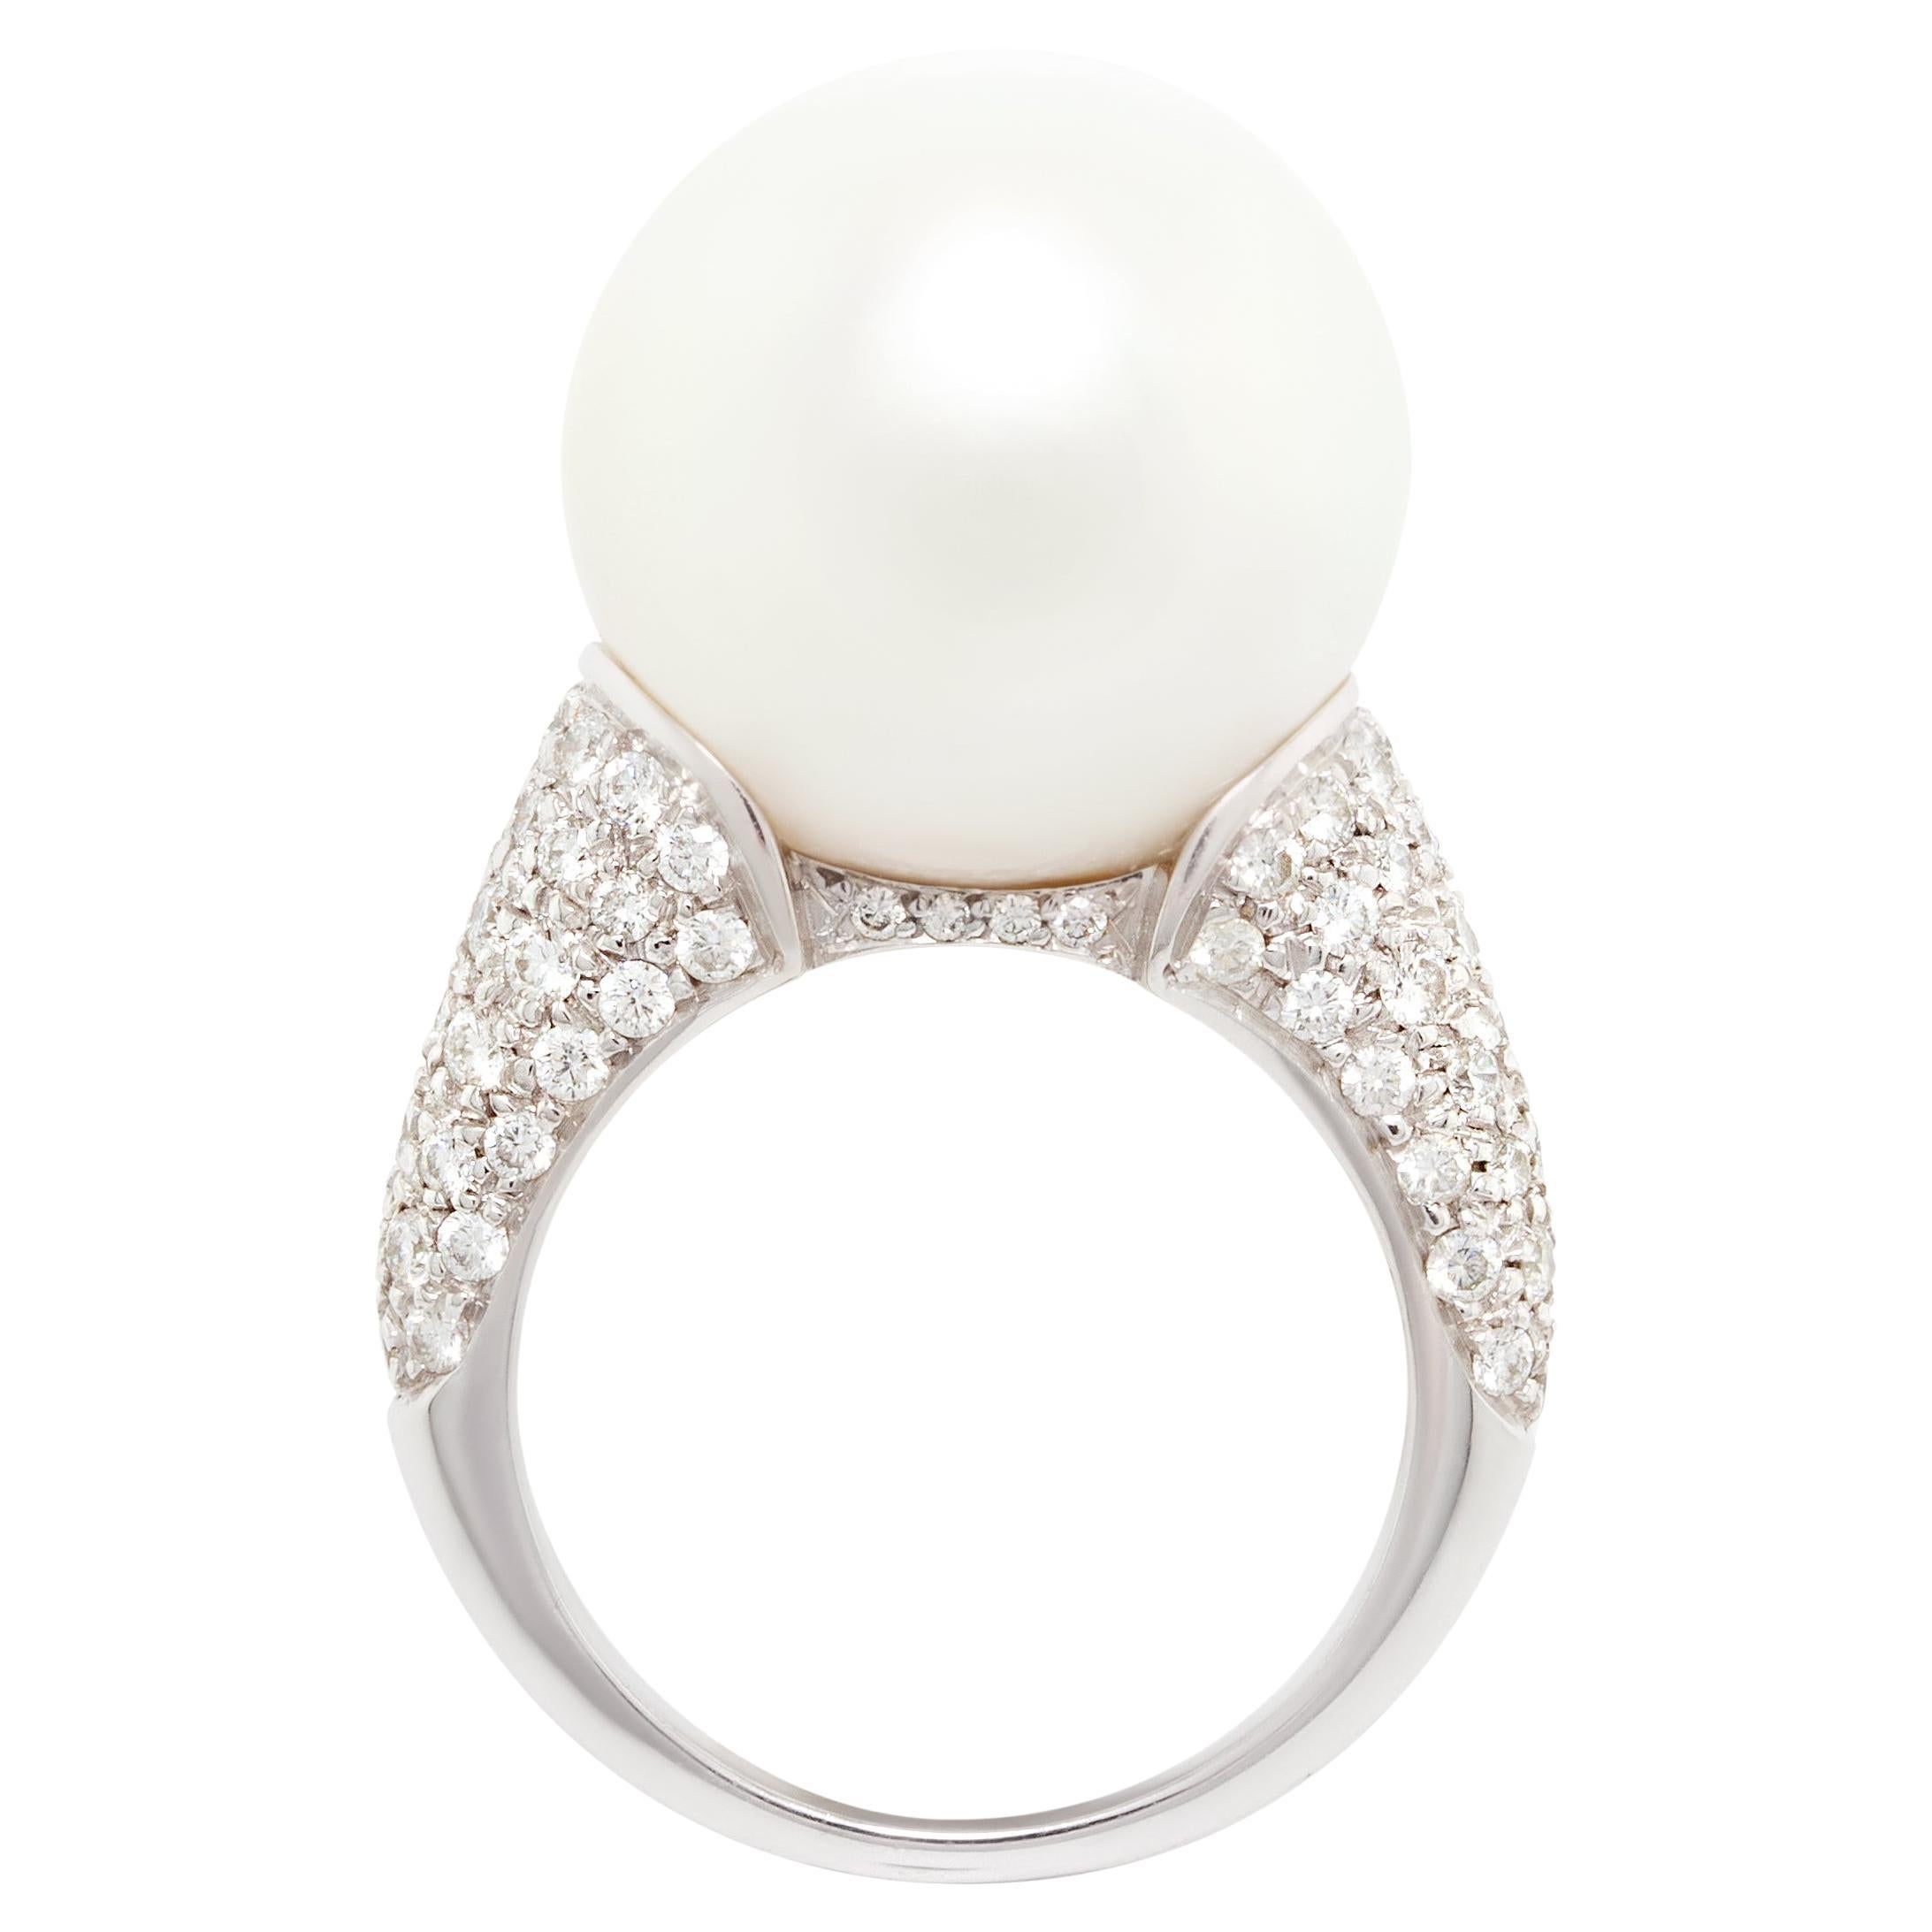 Ella Gafter 16mm South Sea Pearl Diamond Cocktail Ring For Sale